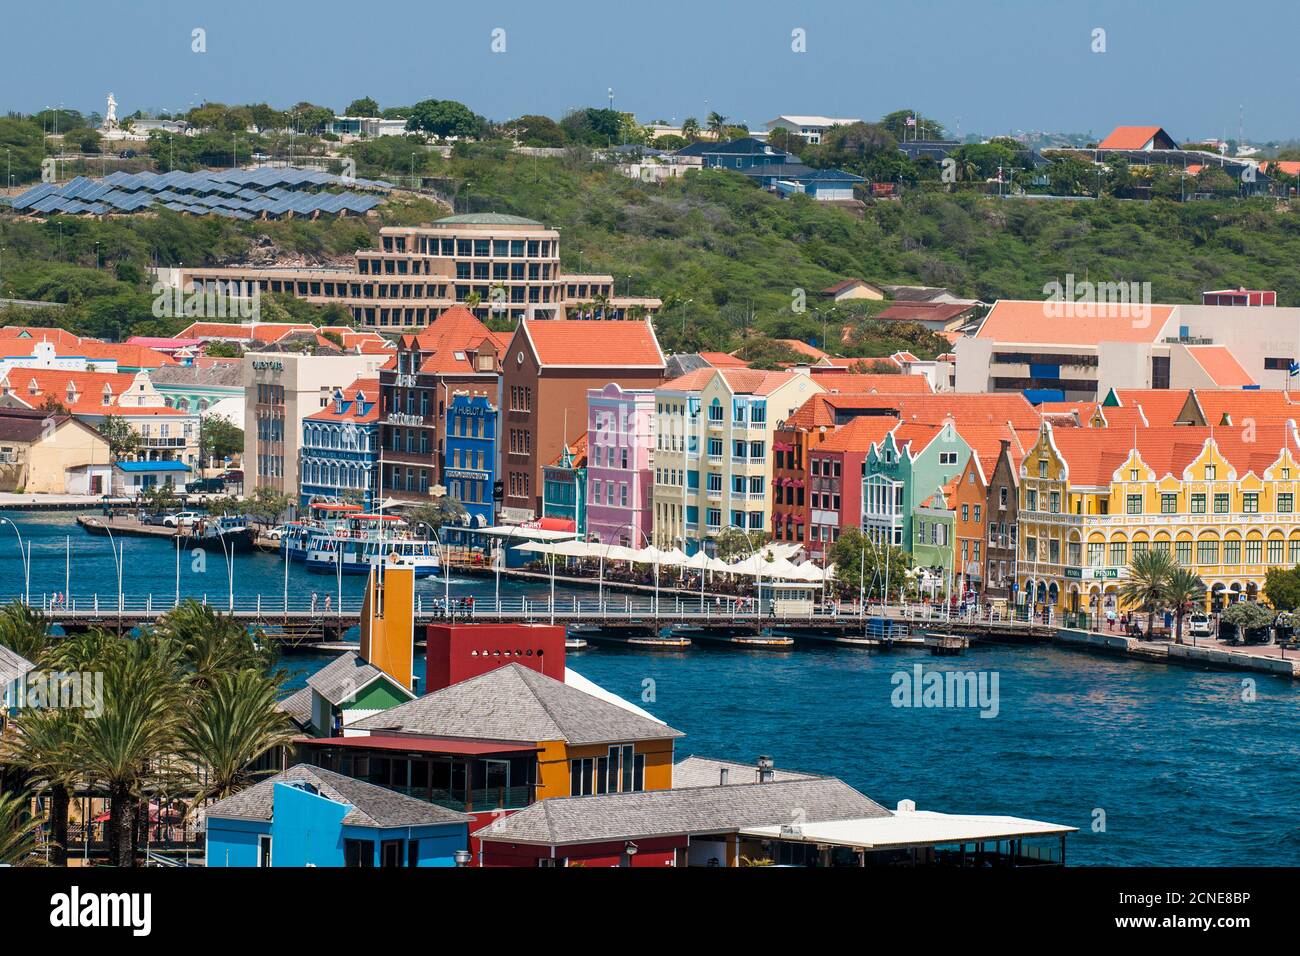 Aerial view of capital city Willemstad, UNESCO World Heritage Site, Curacao, ABC Islands, Dutch Antilles, Caribbean, Central America Stock Photo